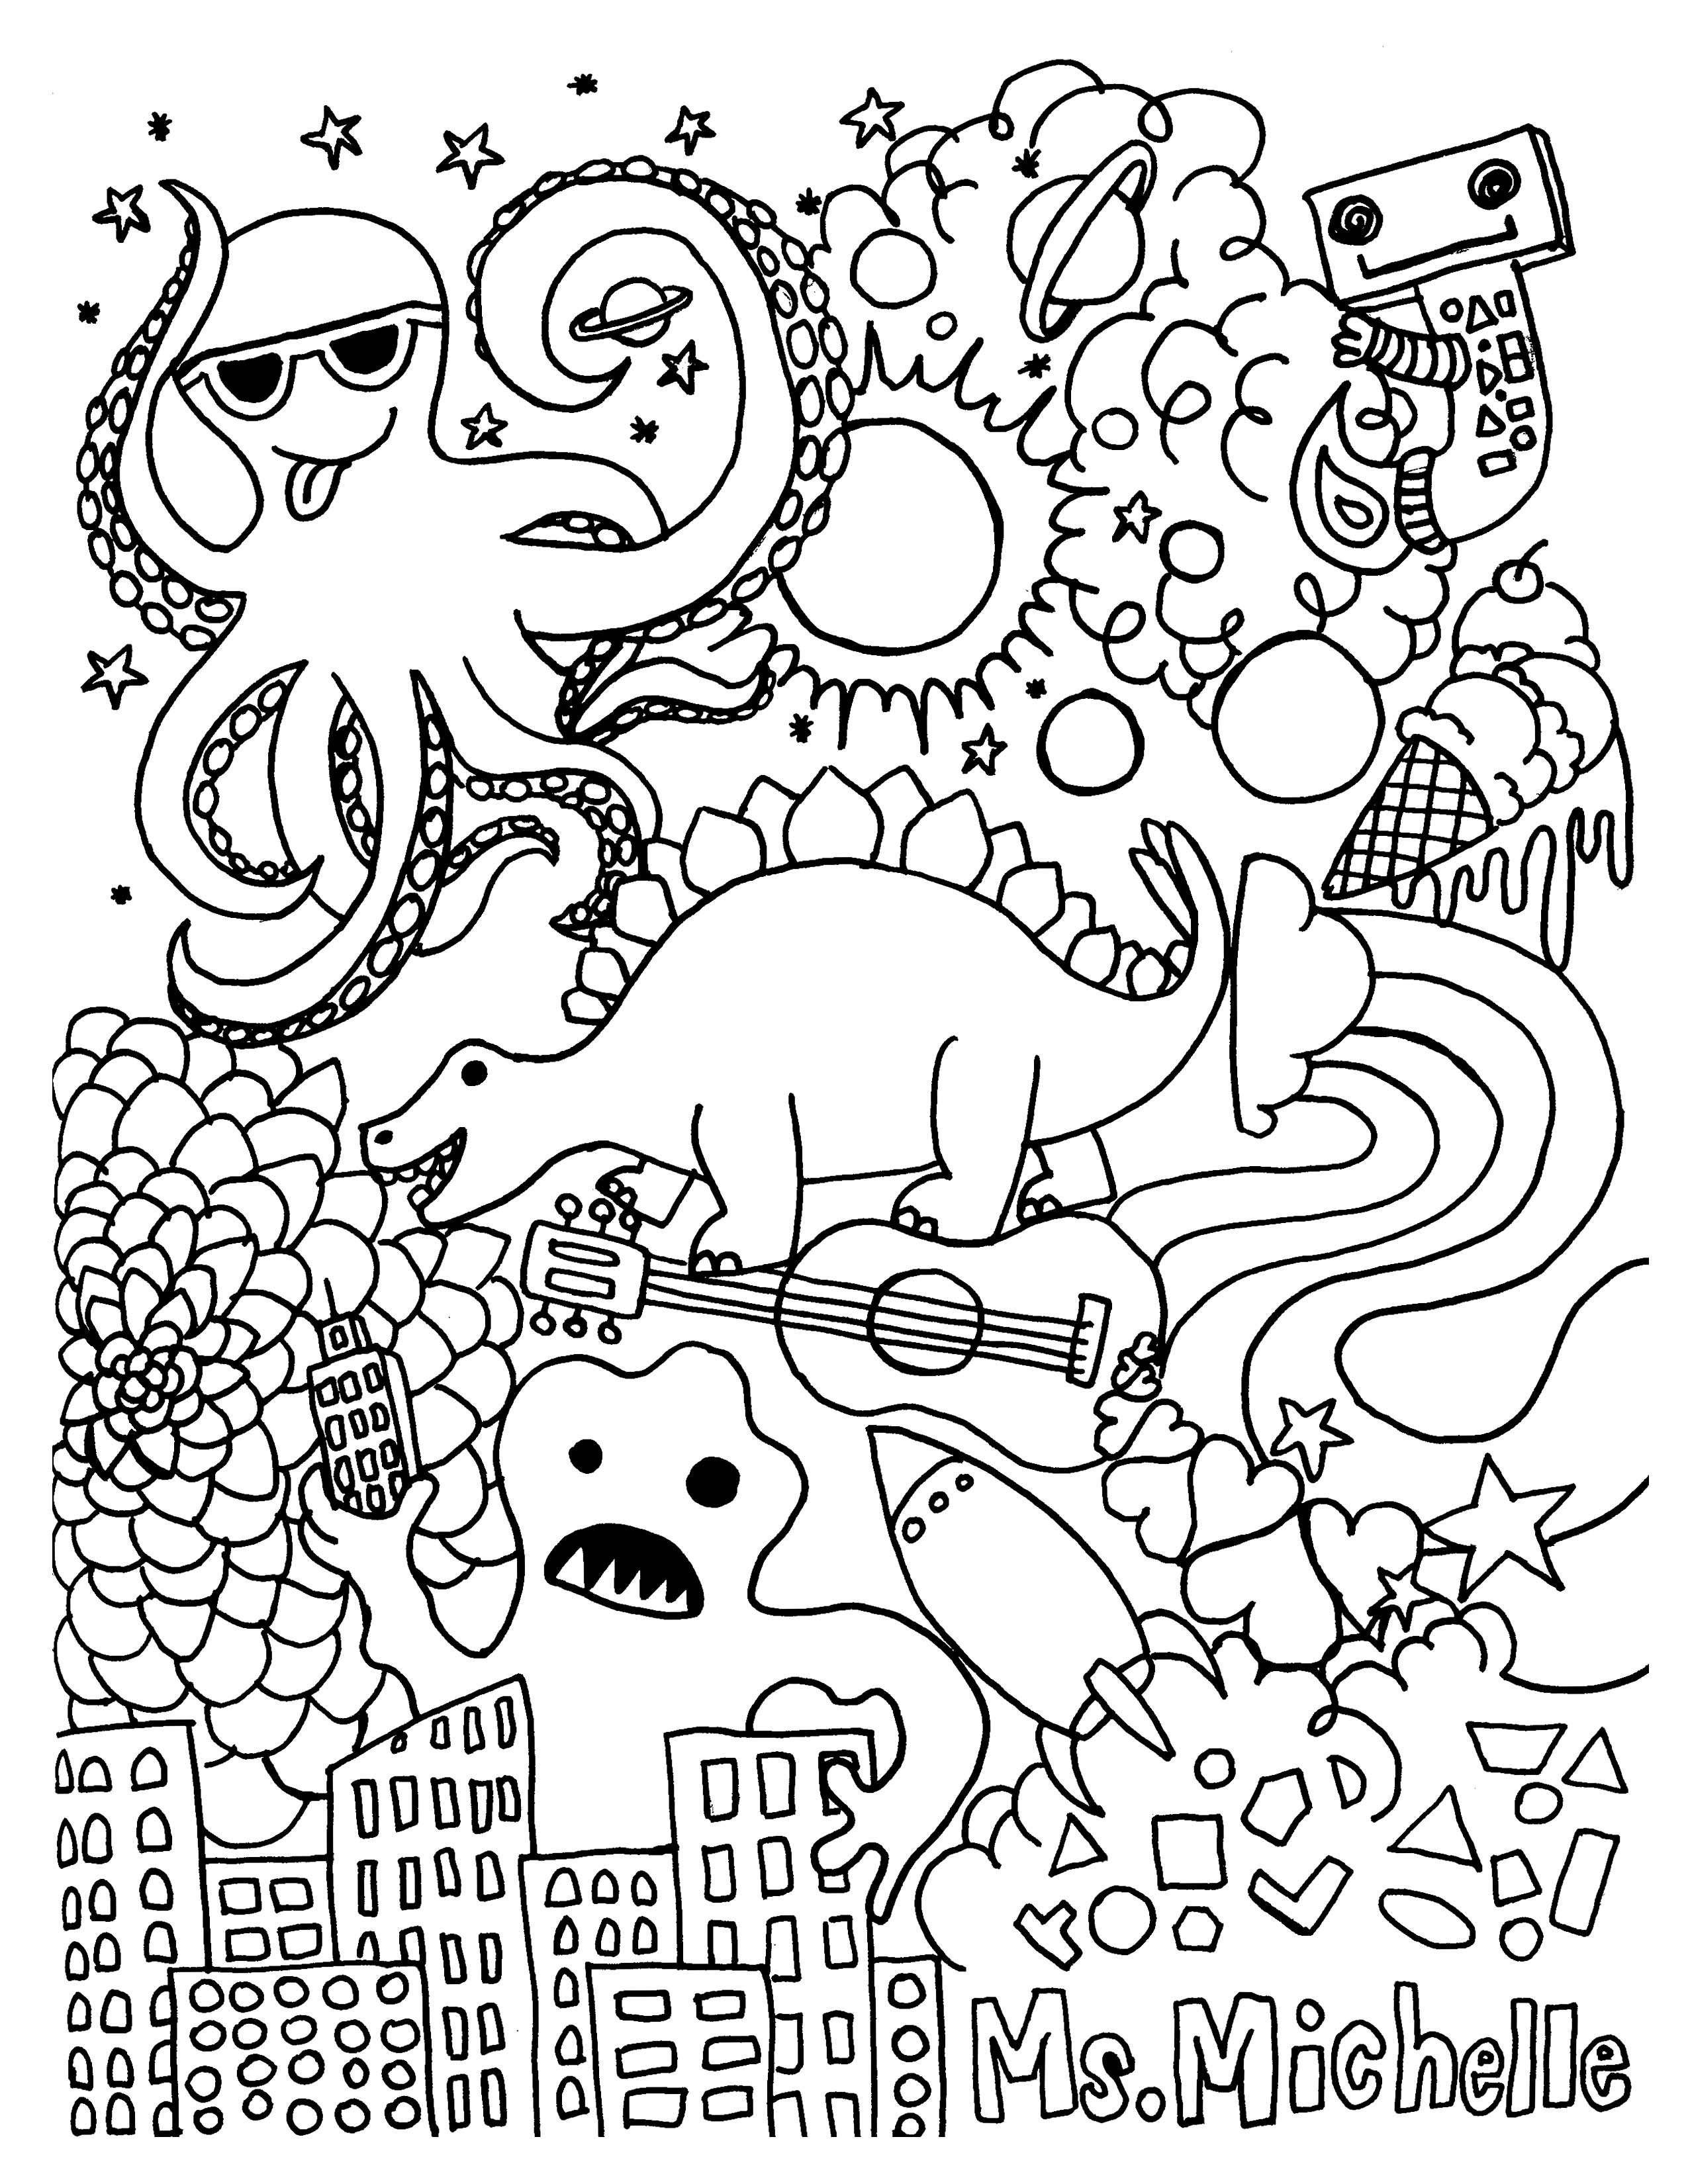 Coloring Pages and Activities Printable Wallpaper